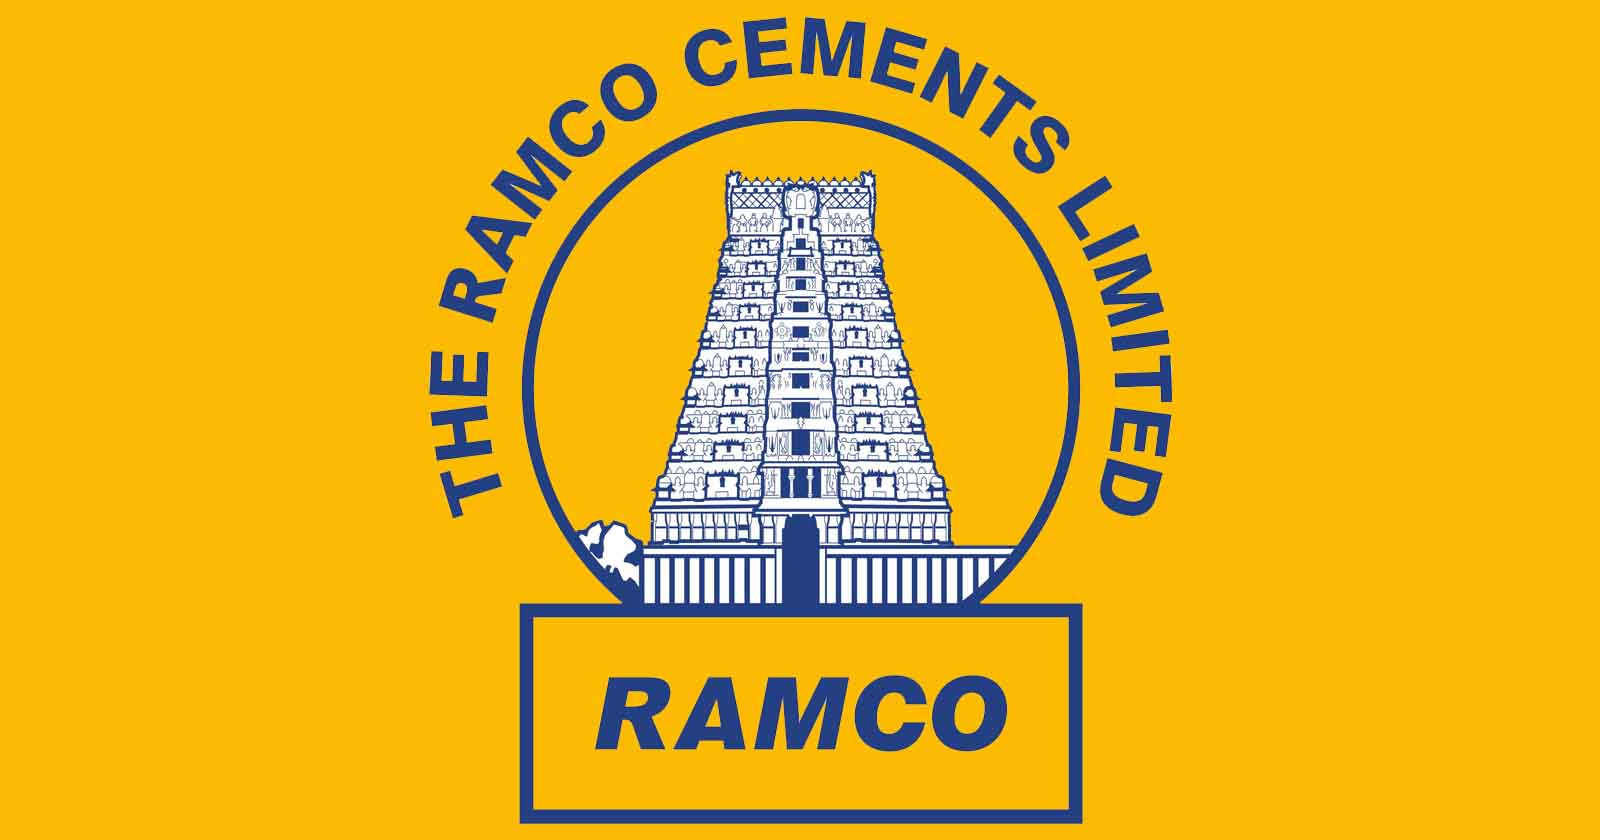 Ramco OPC 53 Grade Cement (Laminated Bag) - Basic Building Materials, Cement  - Buy Ramco OPC 53 Grade Cement (Laminated Bag) Online at Low Price Only on  BuildNext.in - BuildNext